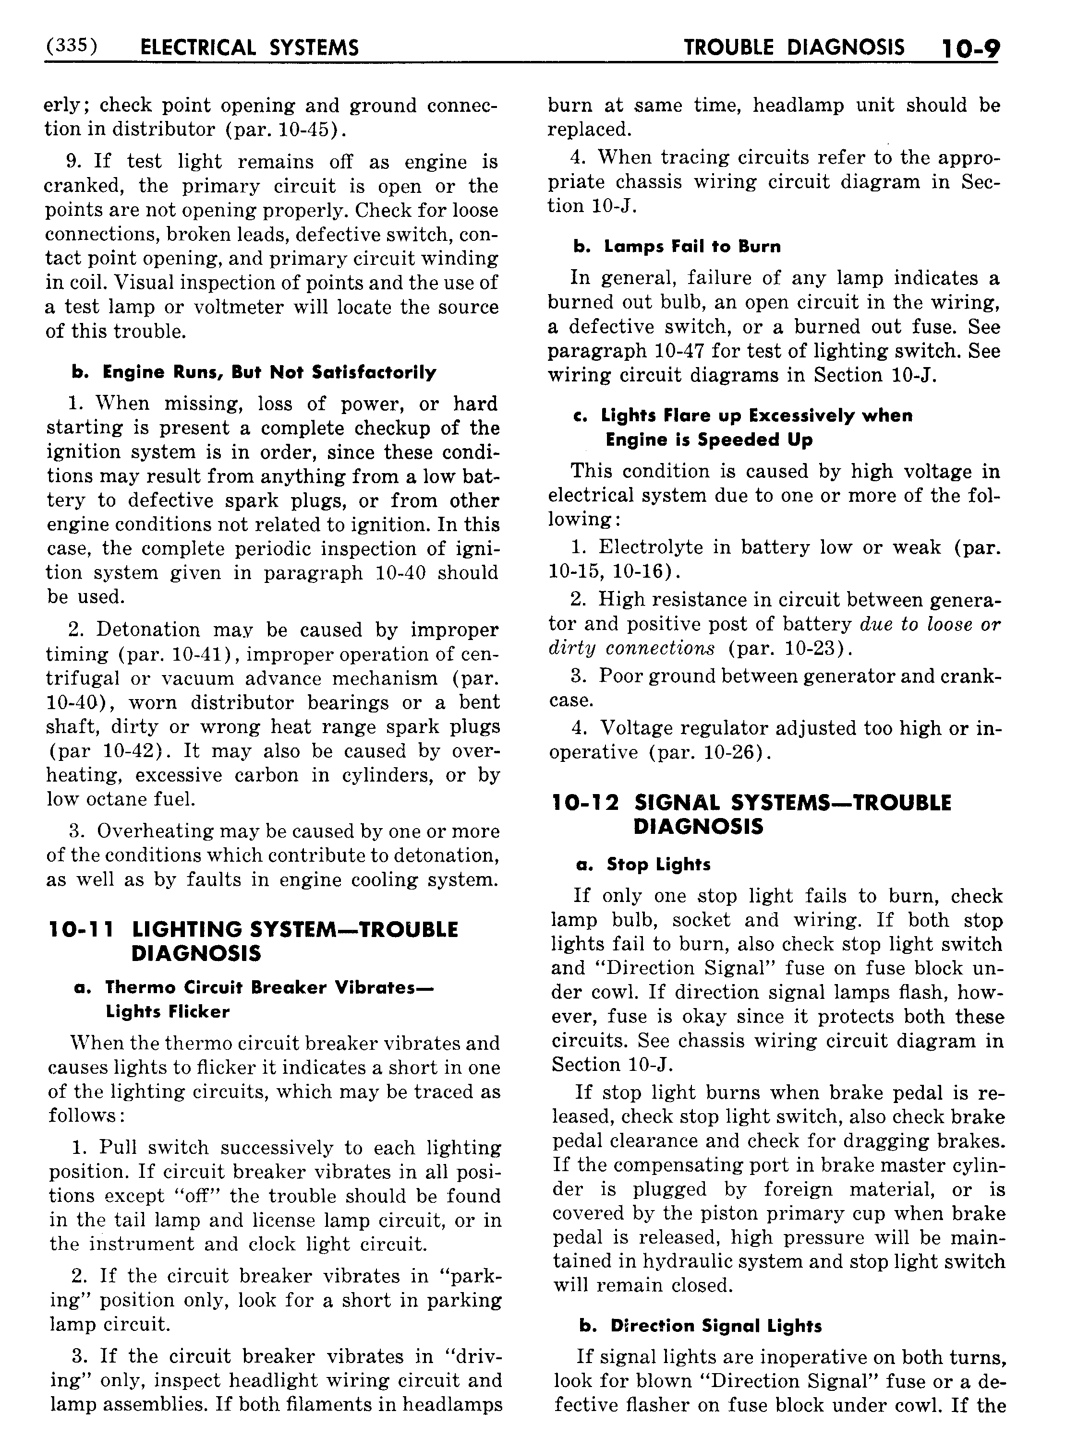 n_11 1956 Buick Shop Manual - Electrical Systems-009-009.jpg